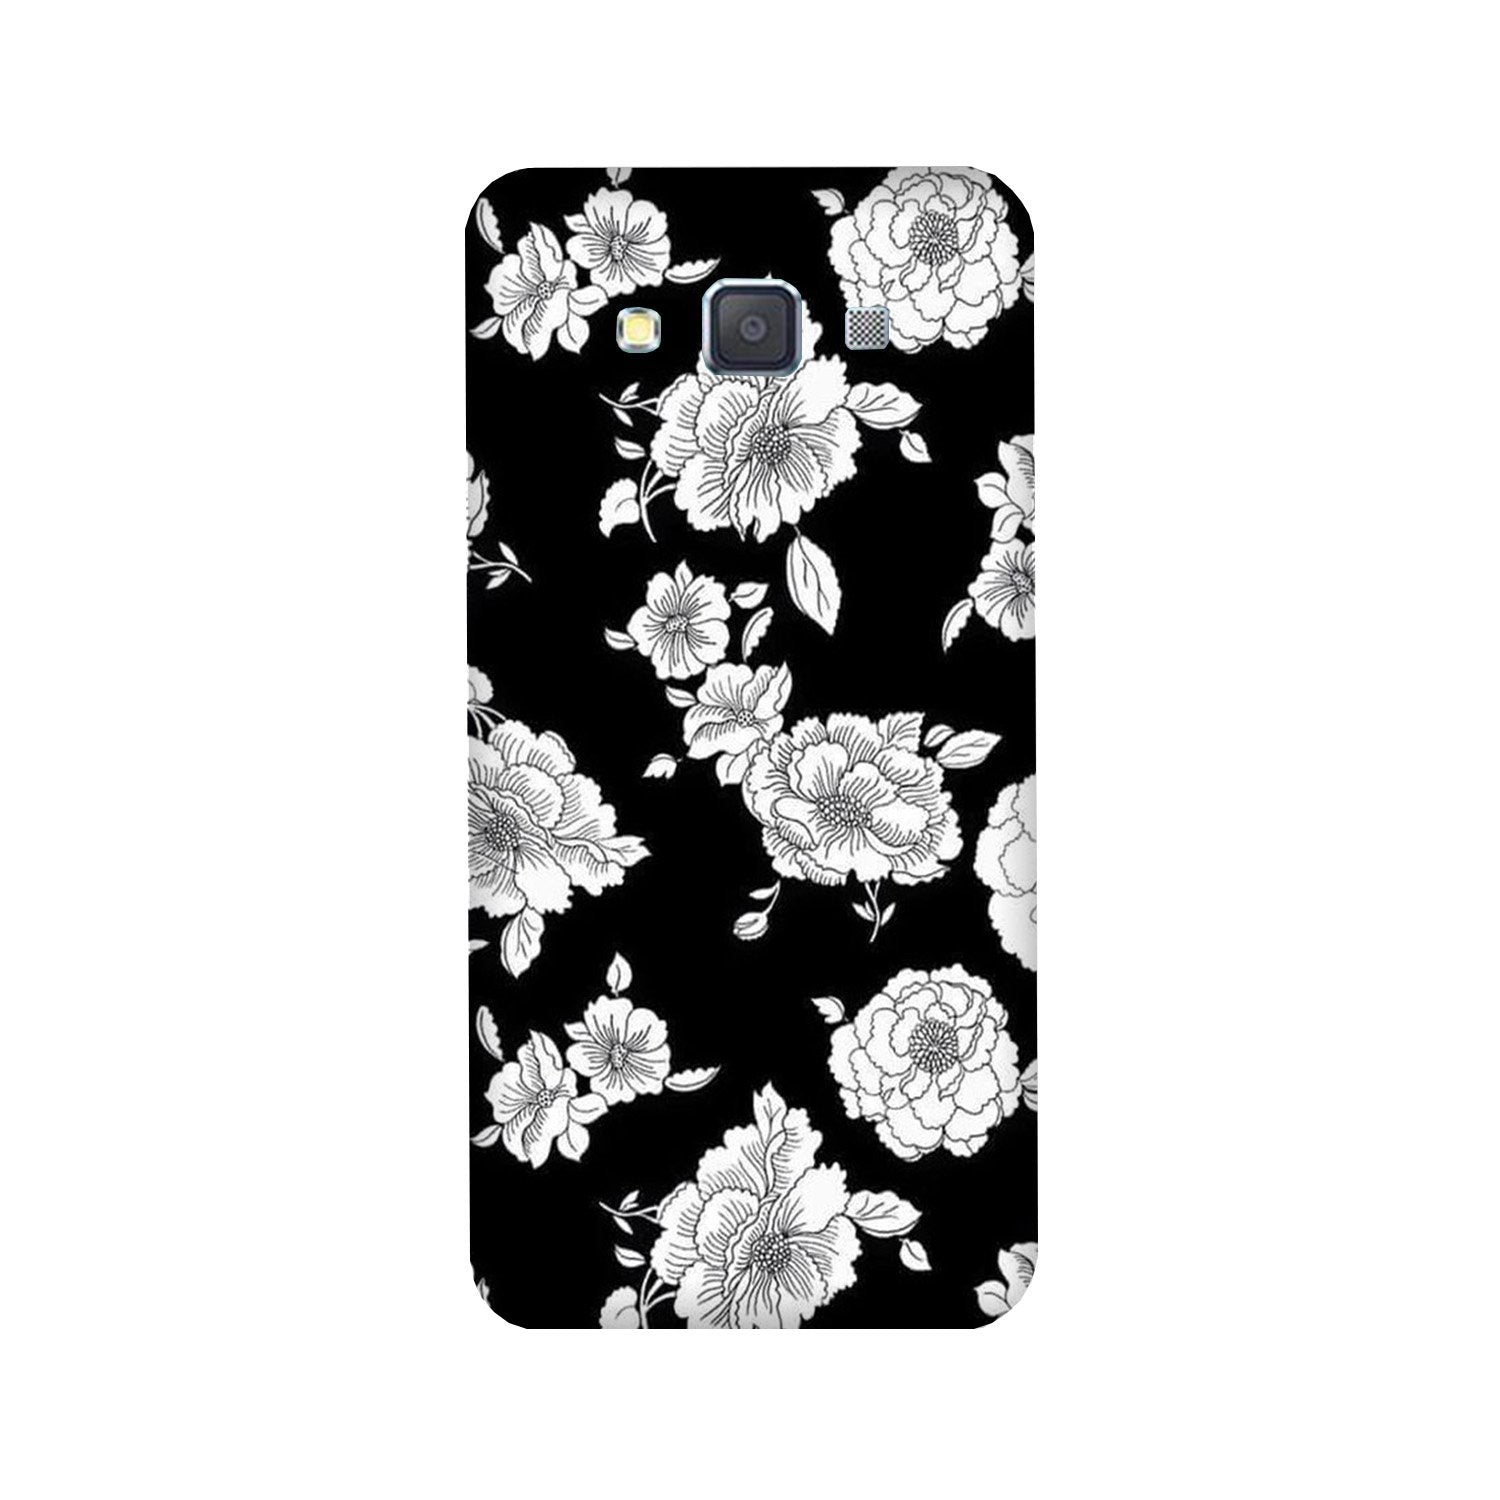 White flowers Black Background Case for Galaxy Grand 2